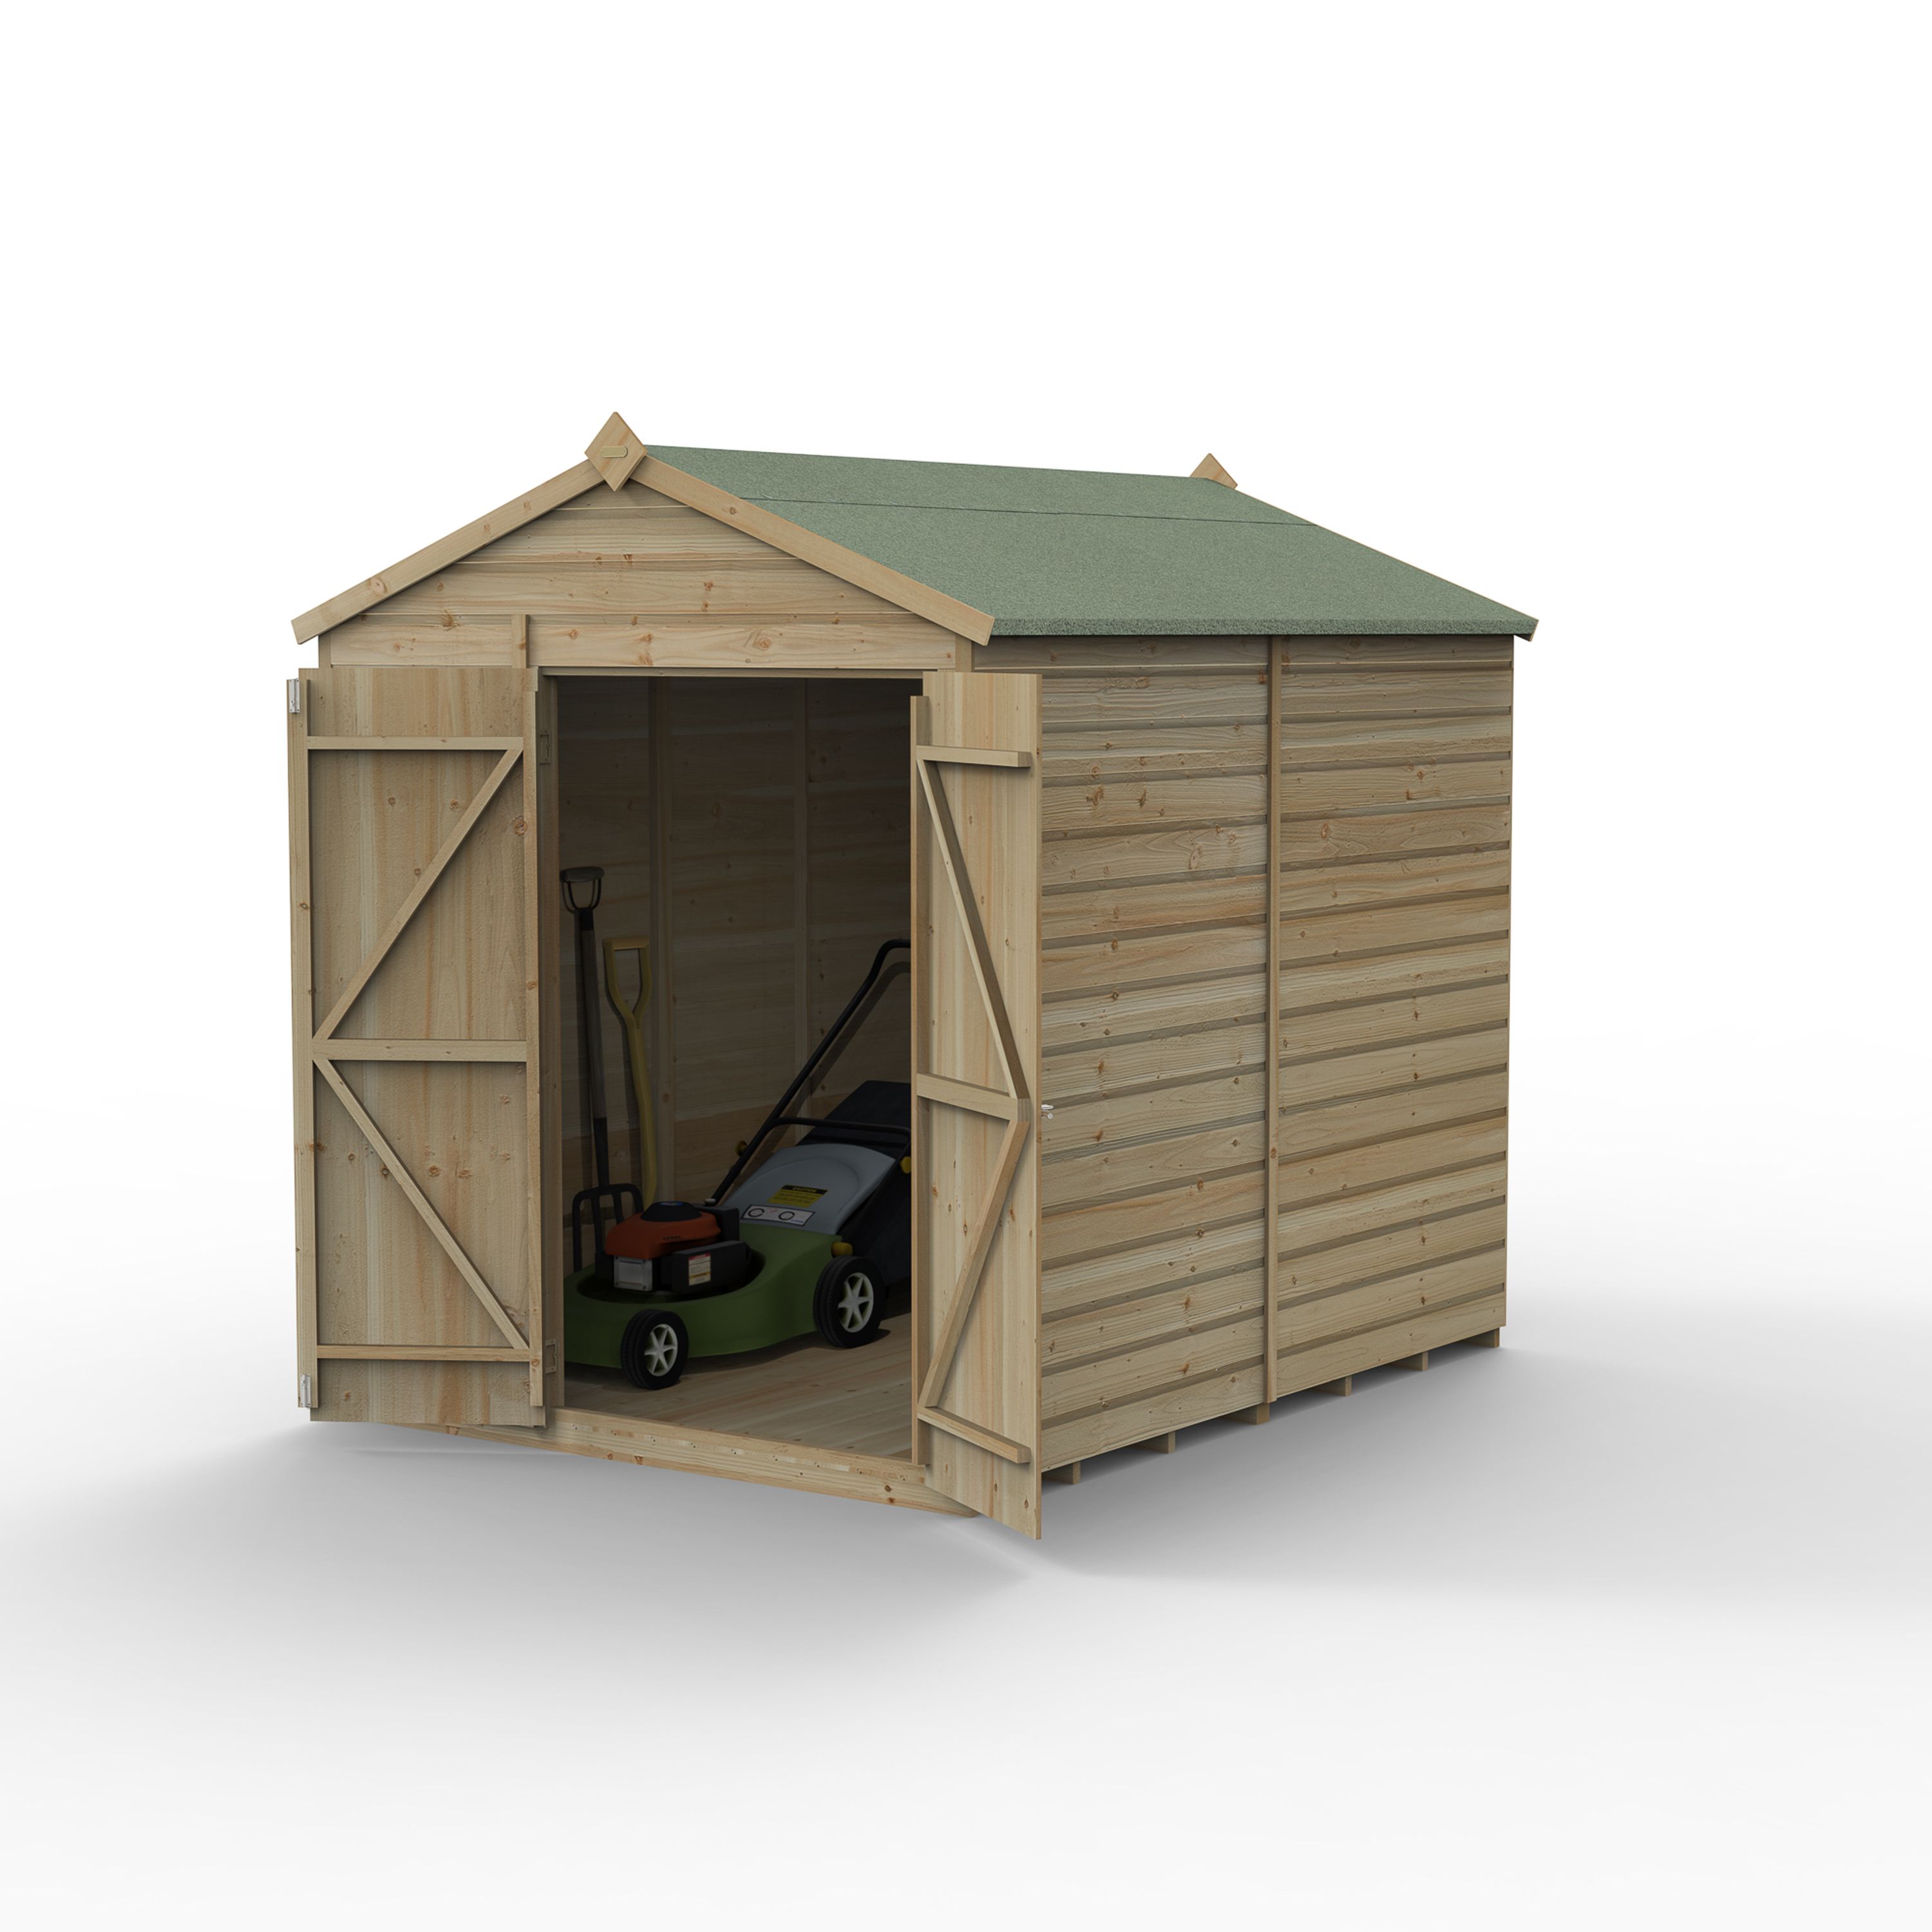 Forest Garden Beckwood 8x6 ft Apex Natural timber Wooden 2 door Shed with floor